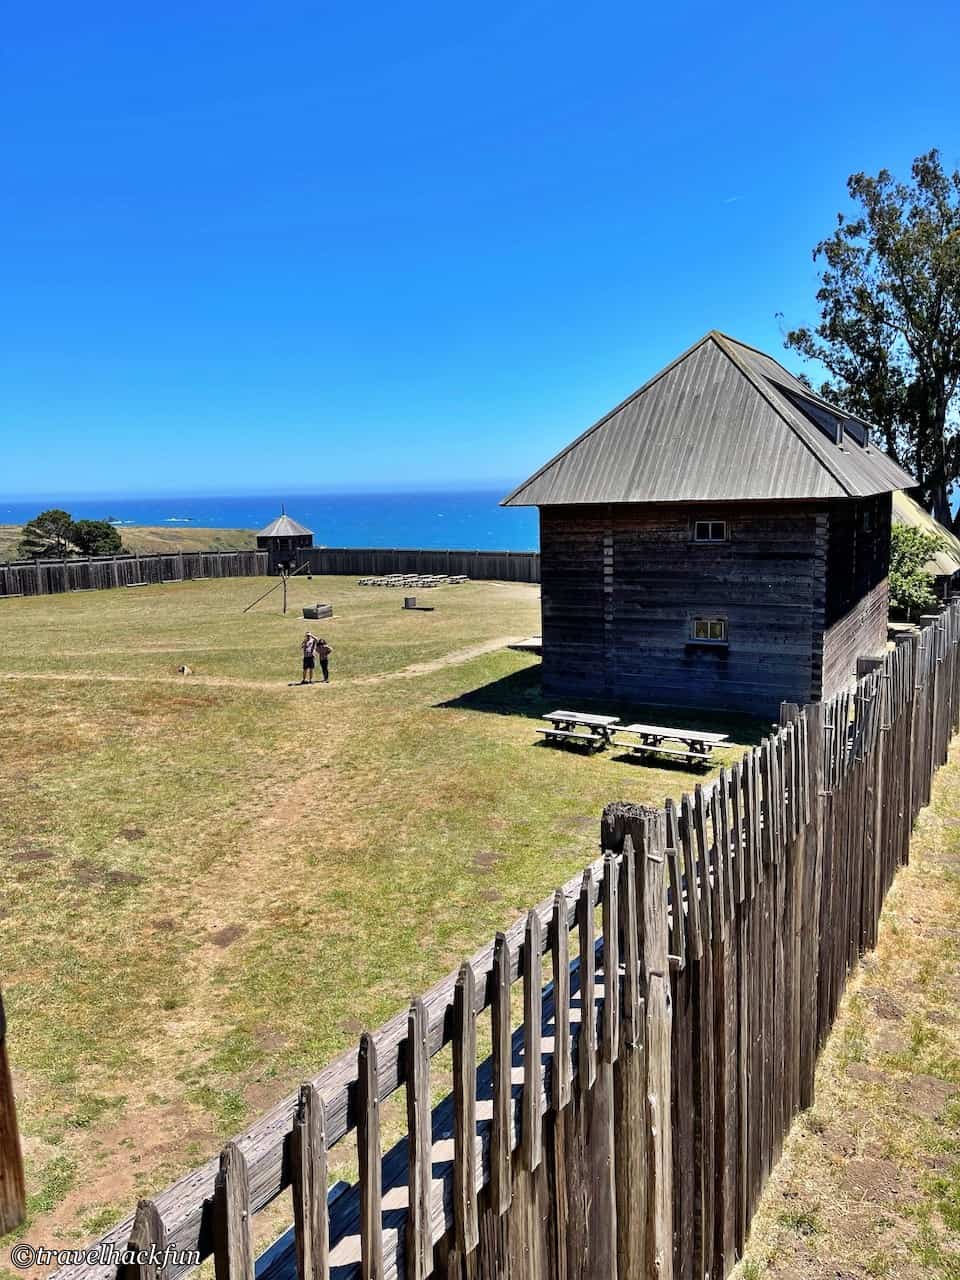 Fort Ross,俄羅斯堡,fort ross state park,fort ross state historic park,fort ross california 9